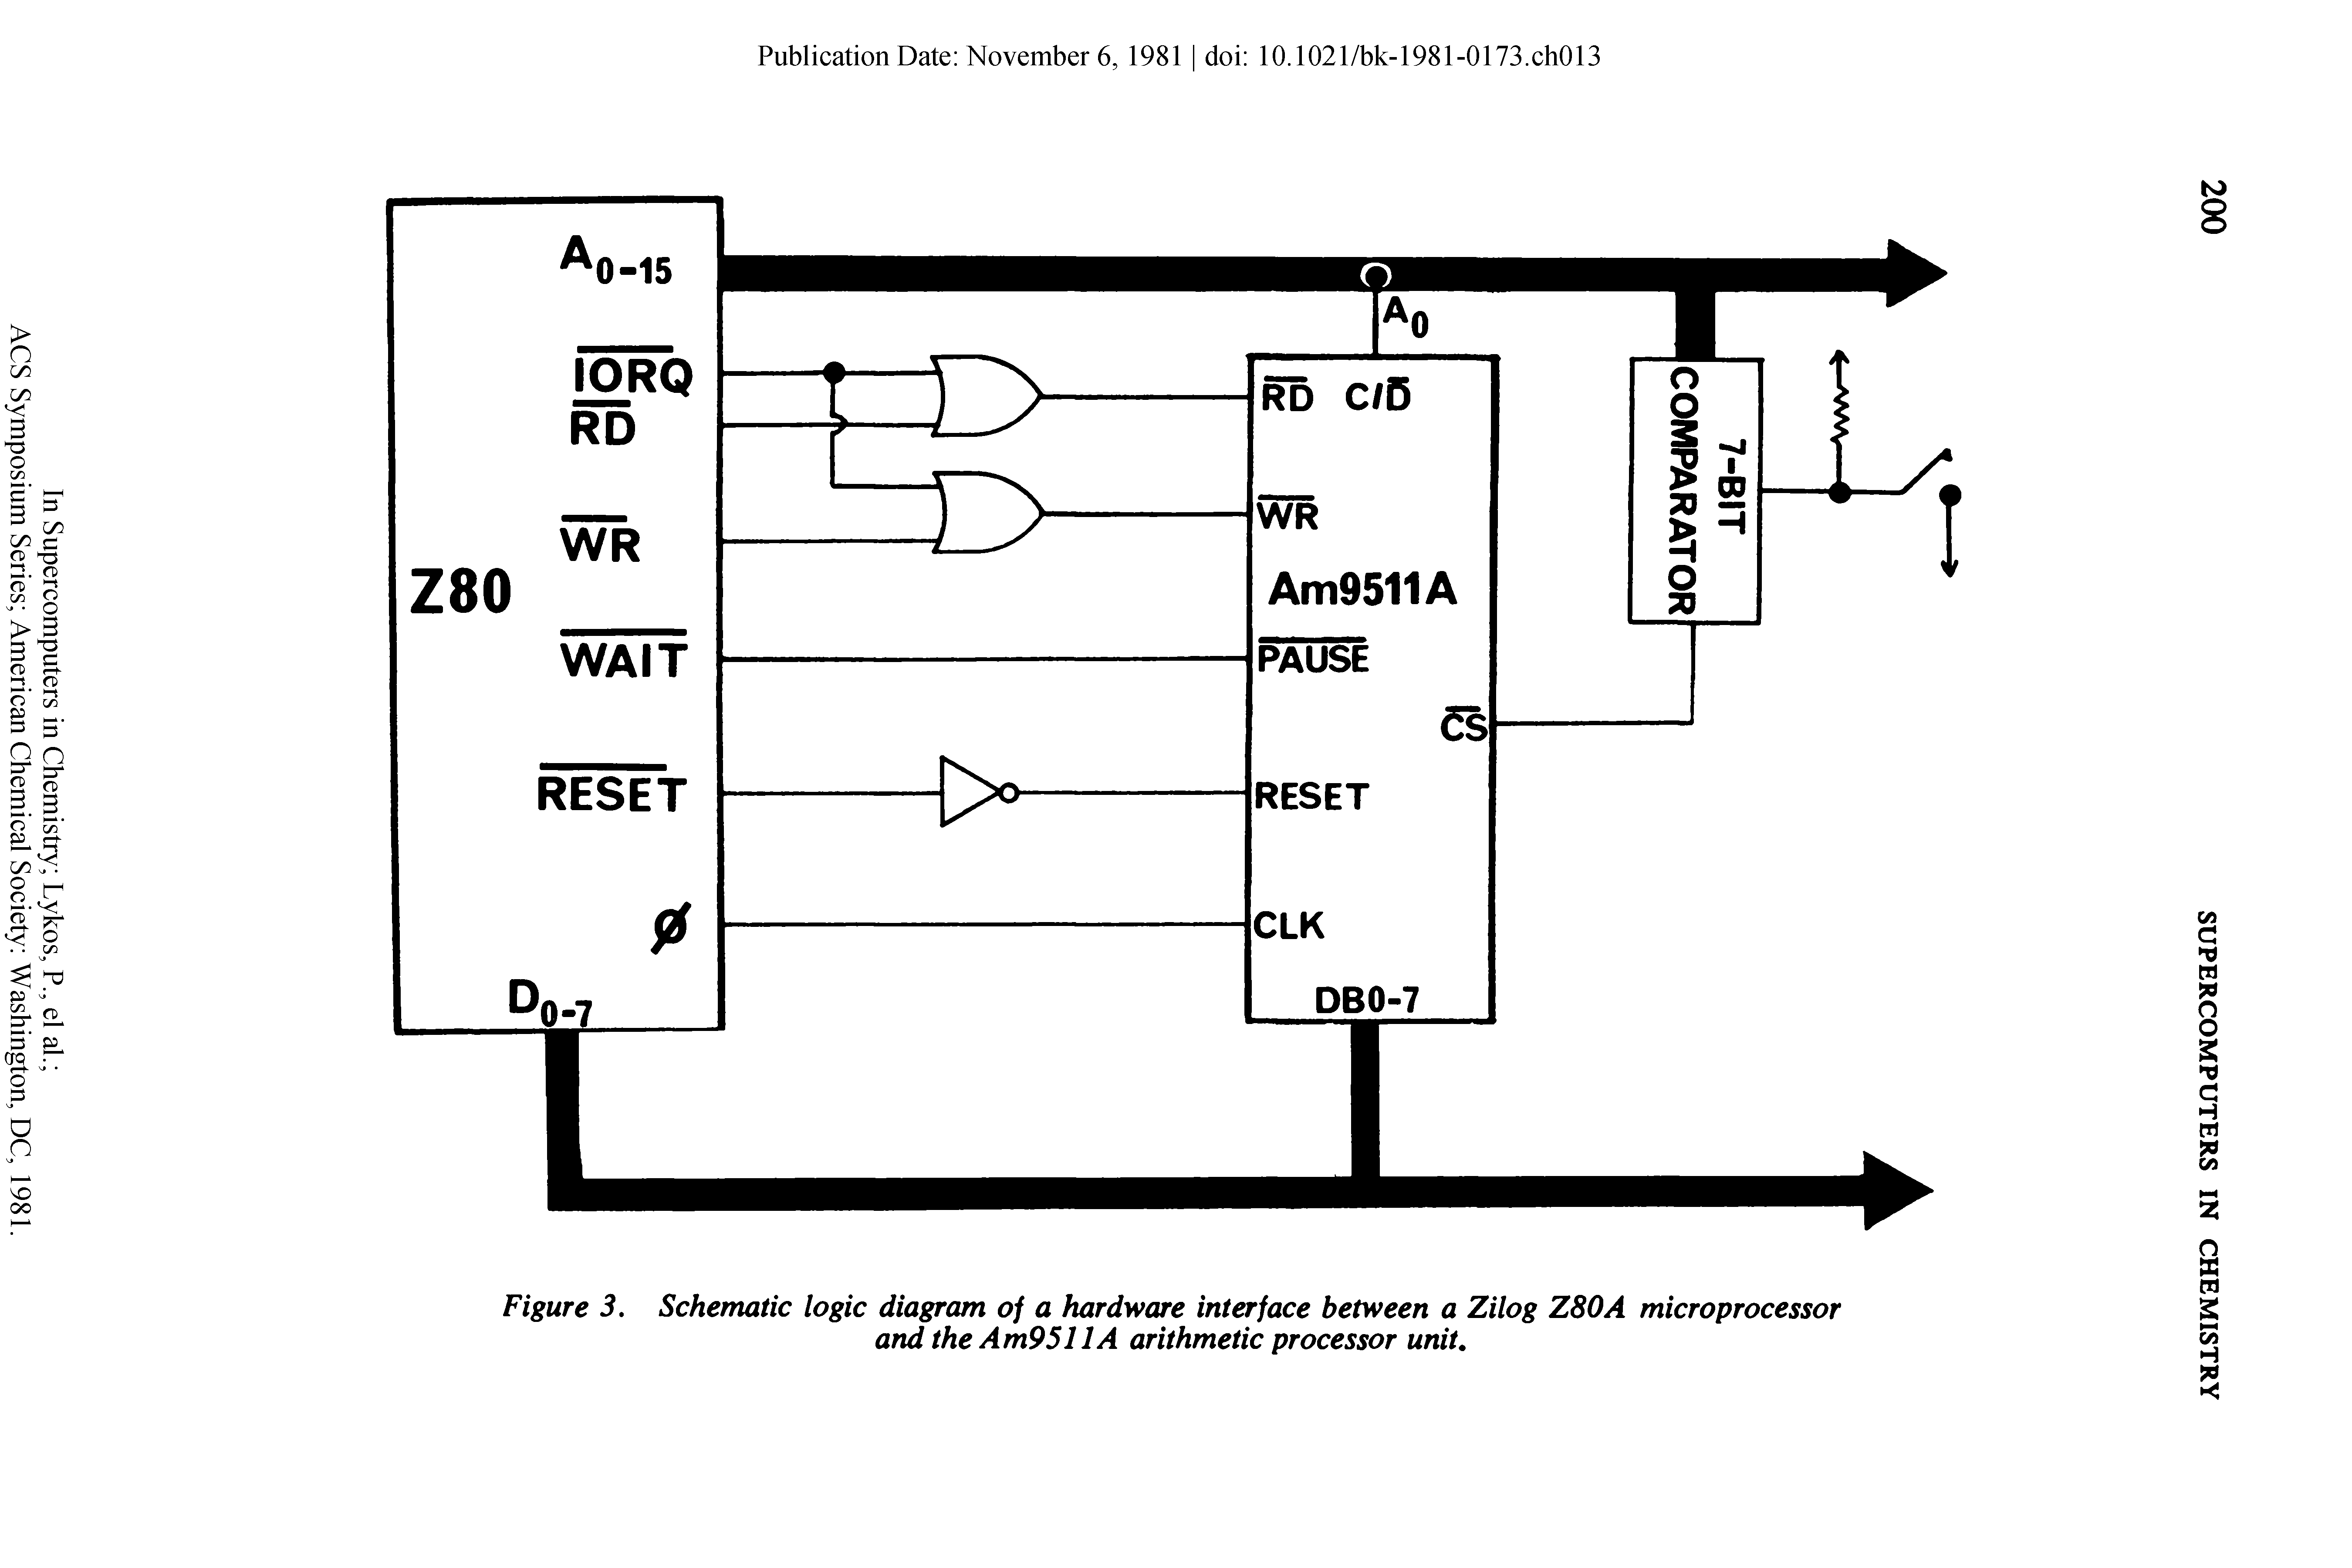 Figure 3. Schematic logic diagram of a hardware interface between a Zilog Z80A microprocessor and the Am9511A arithmetic processor unit.